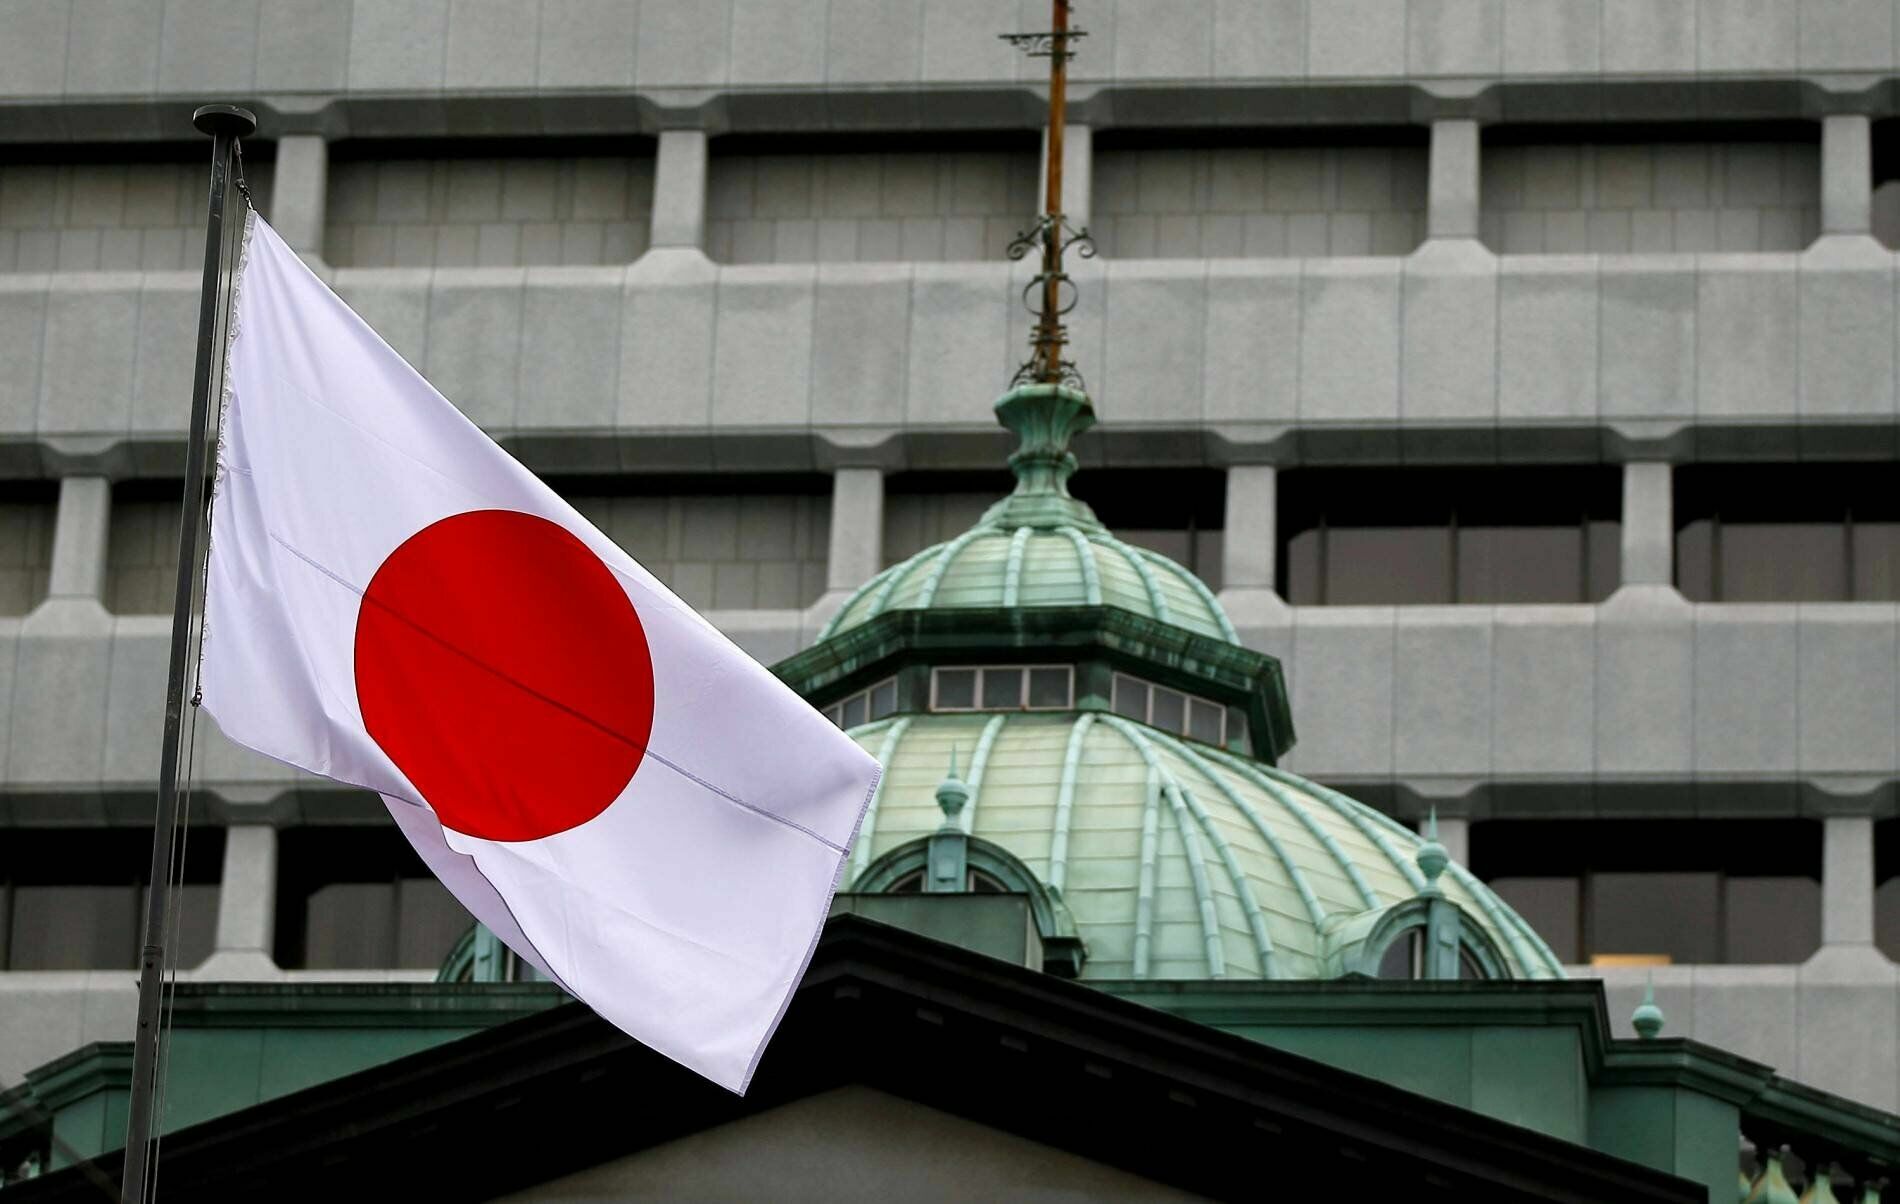 Japan intends to impose sanctions against Russia